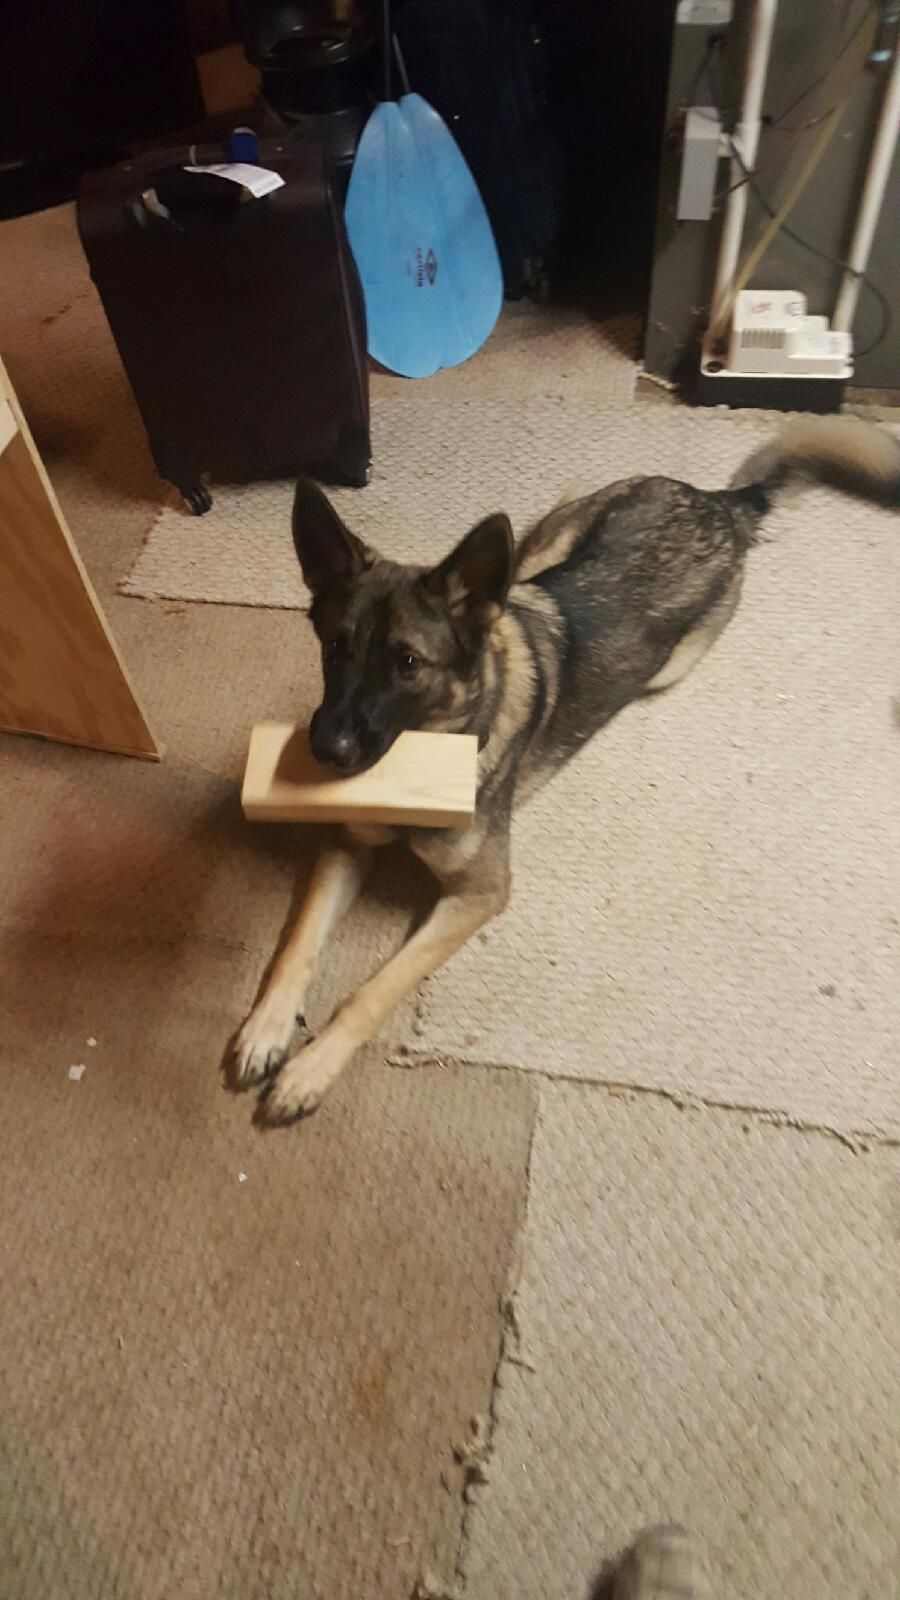 He kept getting in the way while we were building a desk, so we gave him something to hold.